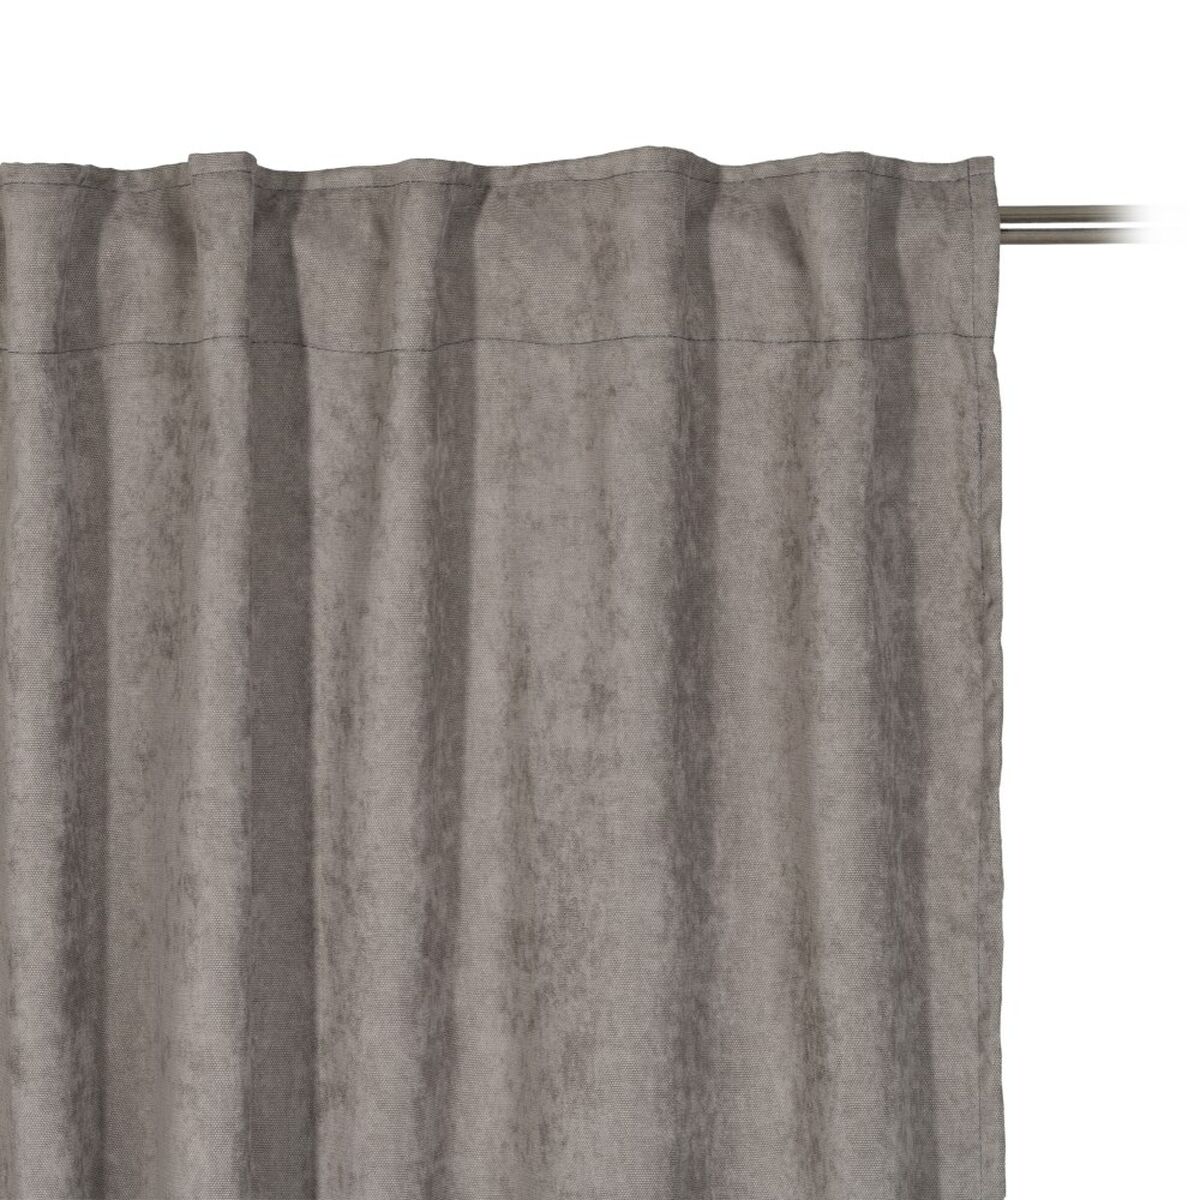 Curtain Polyester Taupe 140 x 260 cm